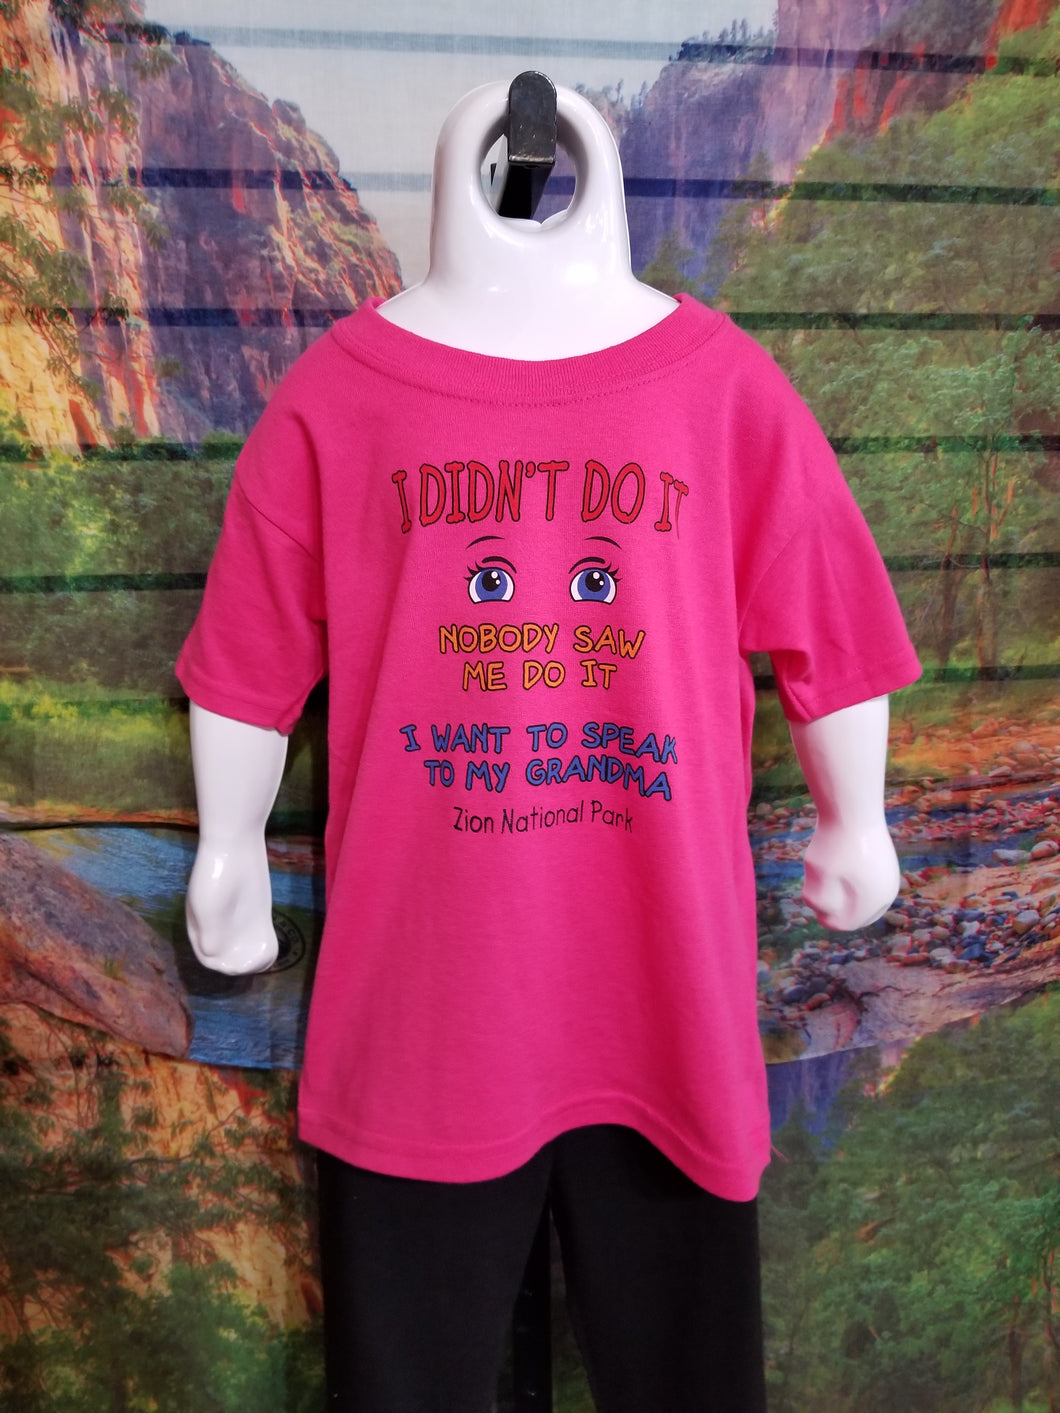 I Didn't Do It Youth Shirt